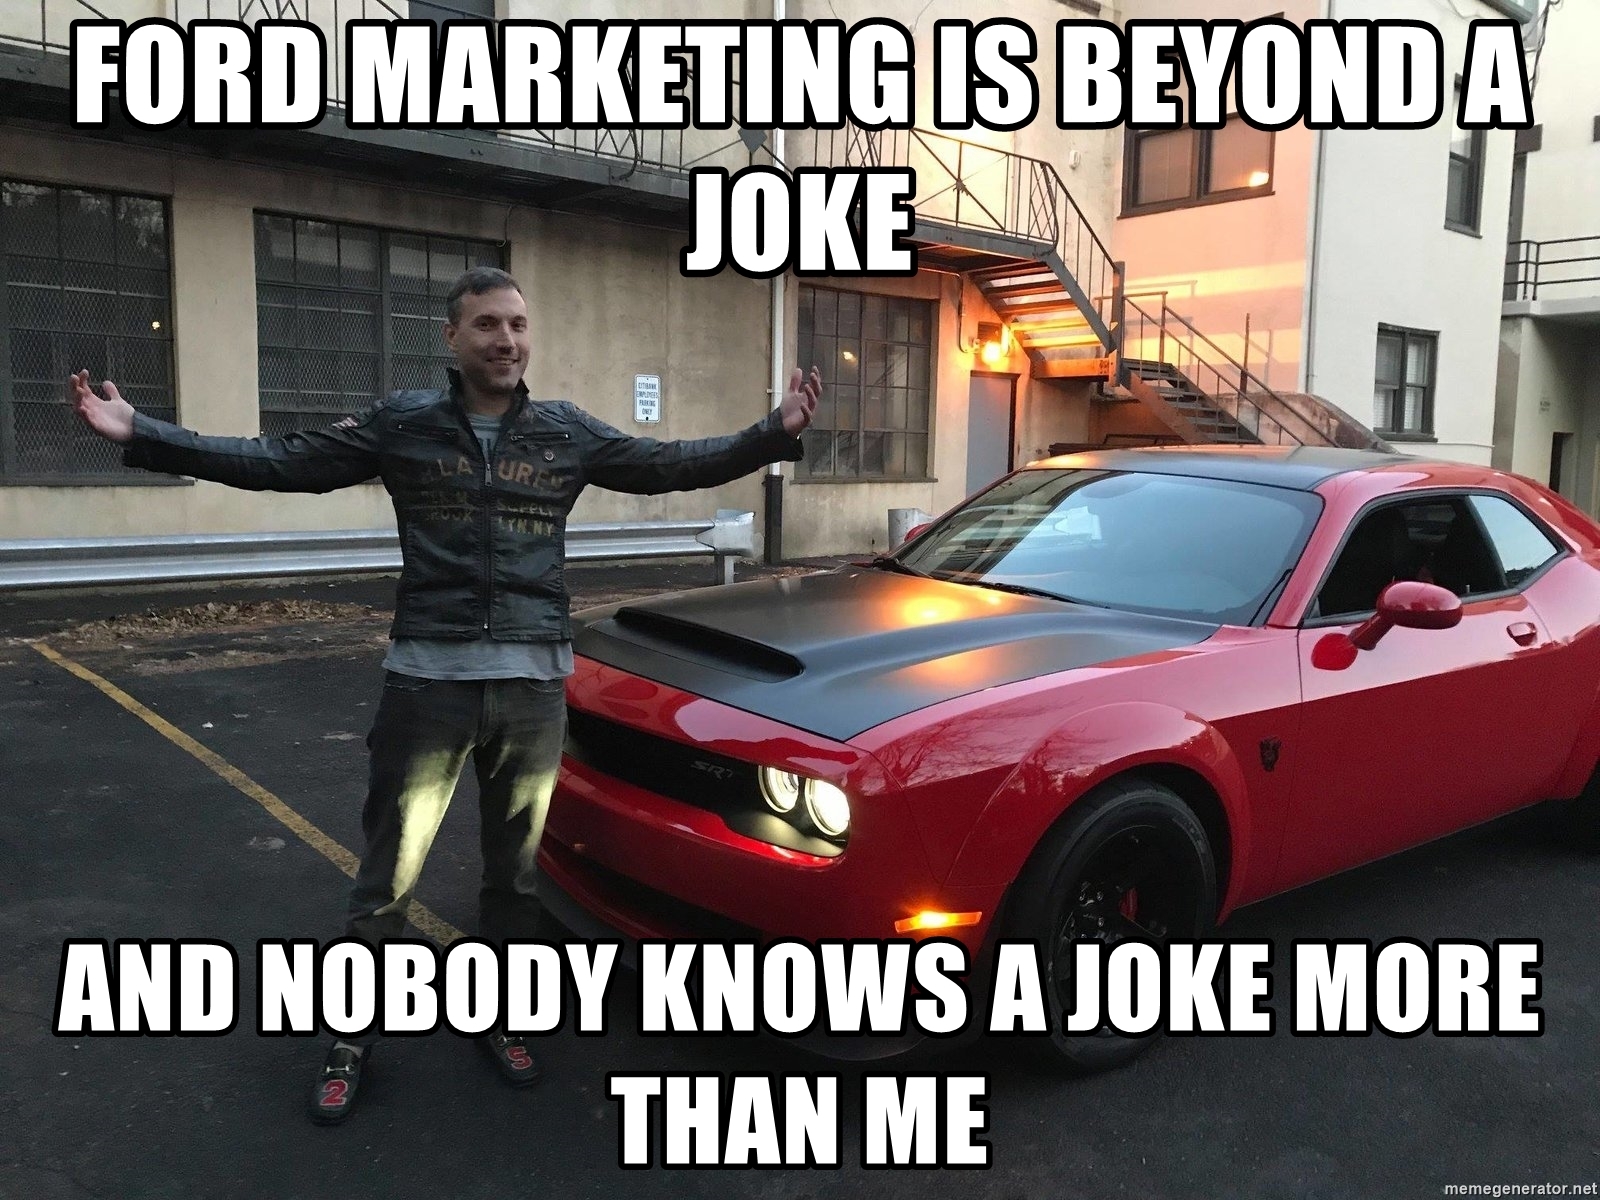 ford-marketing-is-beyond-a-joke-and-nobody-knows-a-joke-more-than-me.jpg